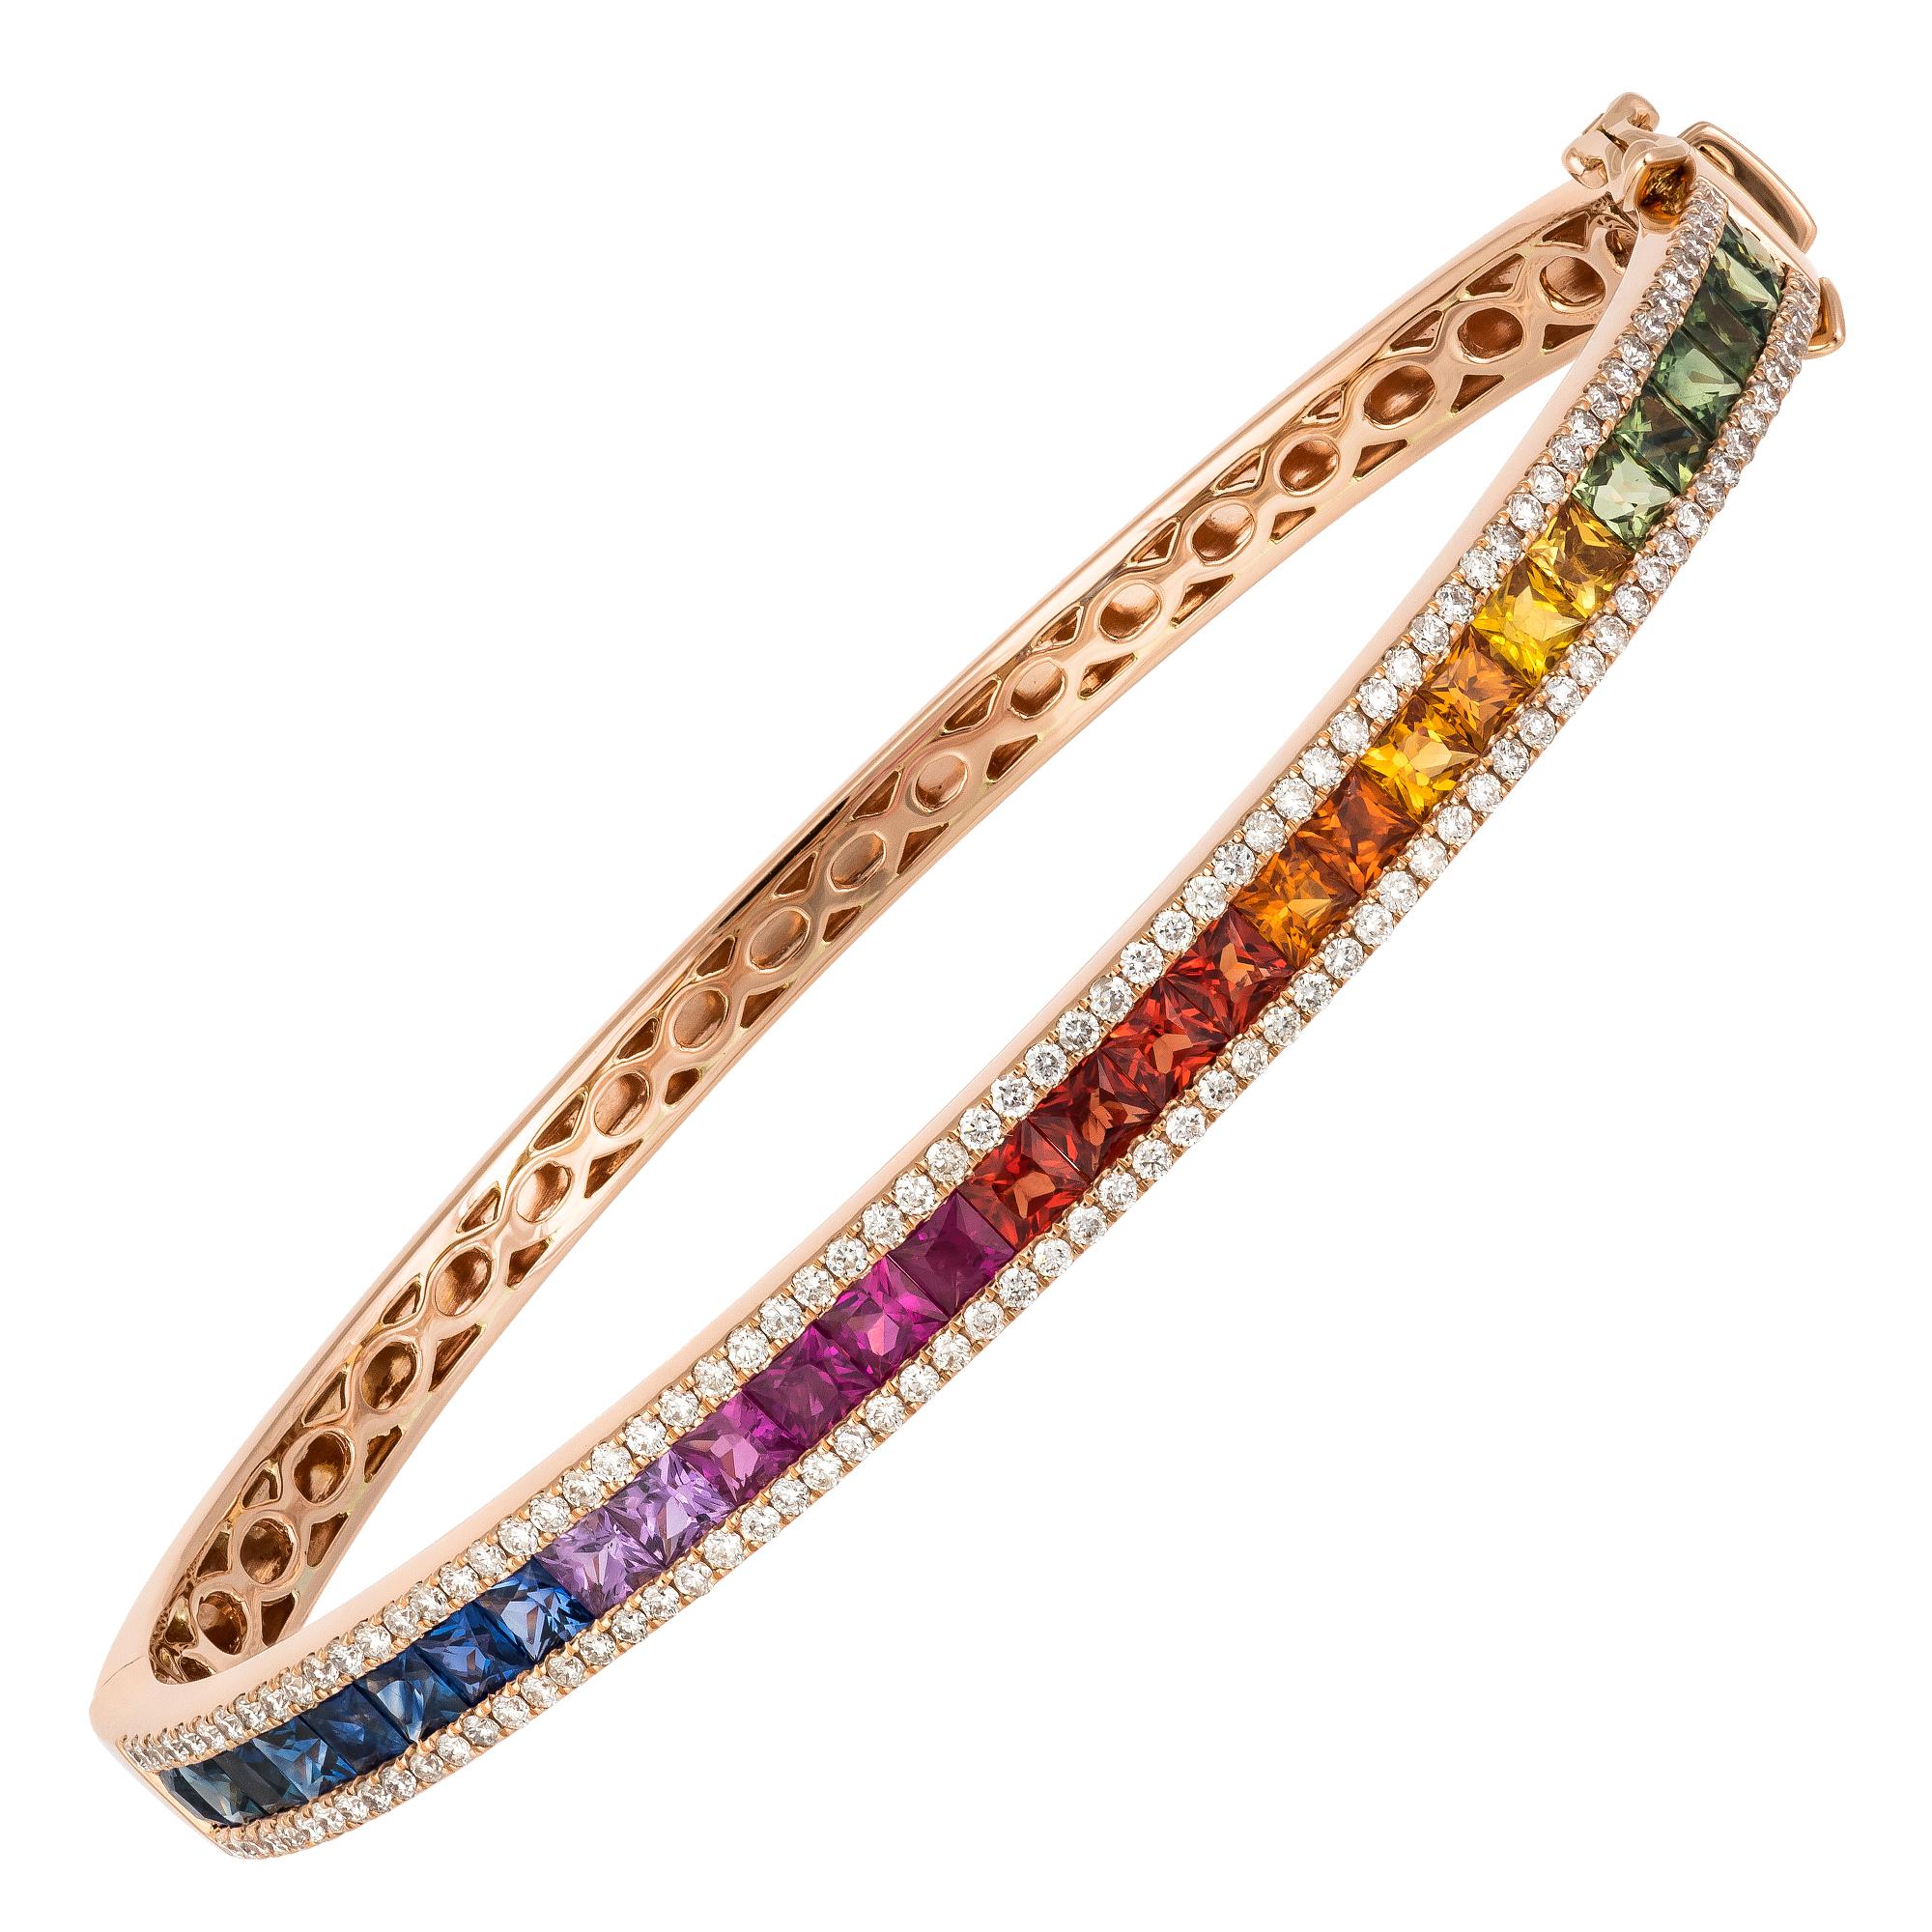 Diamond Tennis Bangle Bracelet 18k Rose Gold Diamond 0.80 Ct/130 Pcs In New Condition For Sale In Montreux, CH